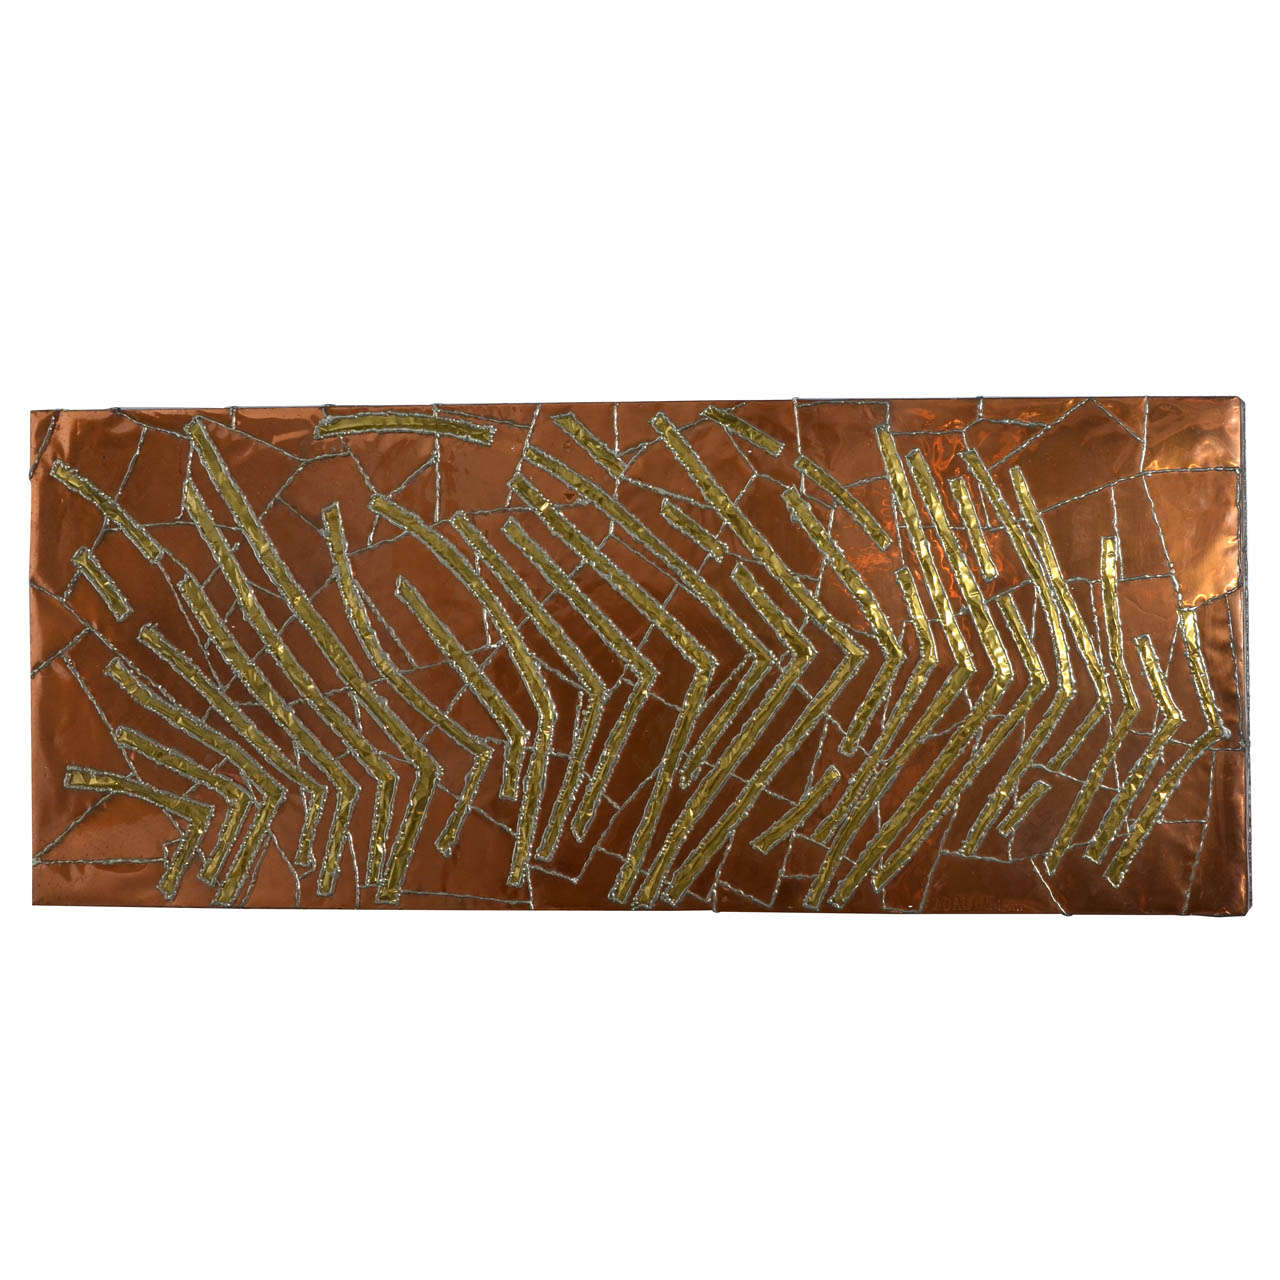 1969 Copper Panel Signed by Adalgari. For Sale